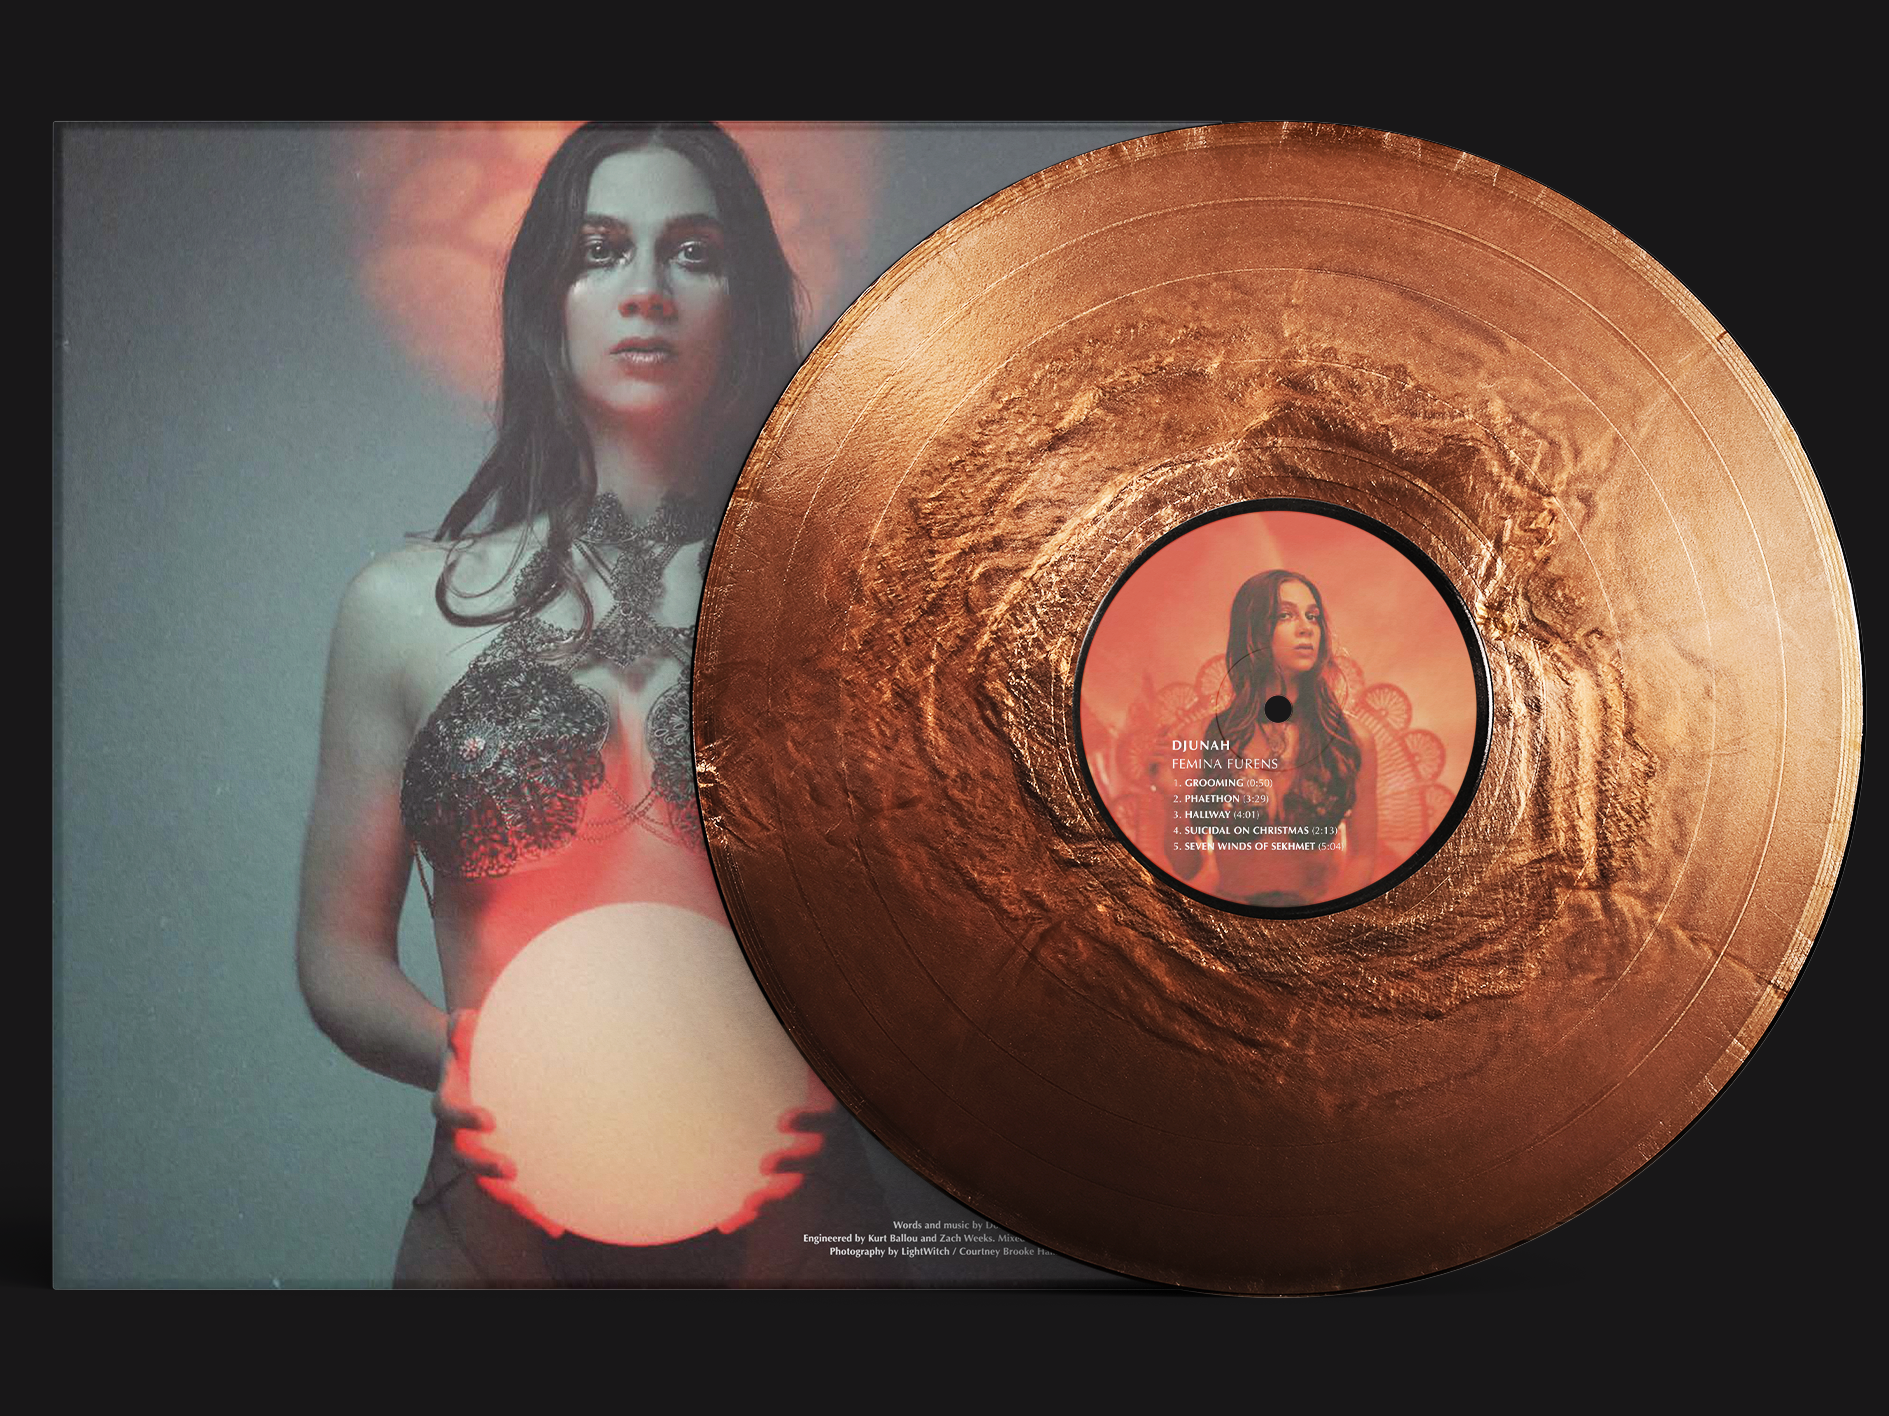 Djunah "Femina Furens" second pressing 12" vinyl LP on molten copper, reverse cover, pressed by Smashed Plastic in Chicago, Illinois